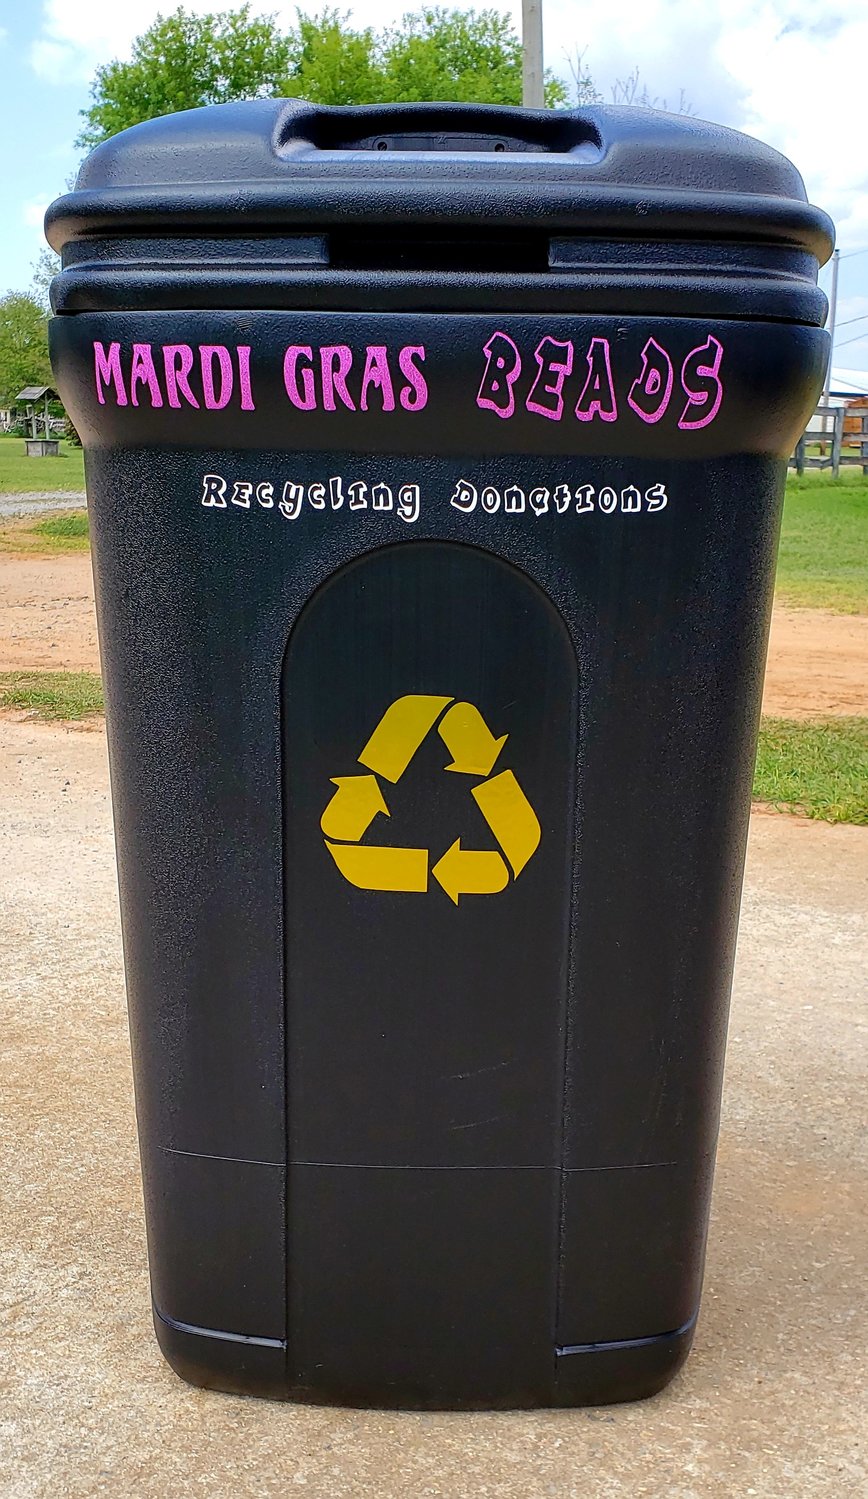 Look for the Mardi Gras throw recycling bins around town!